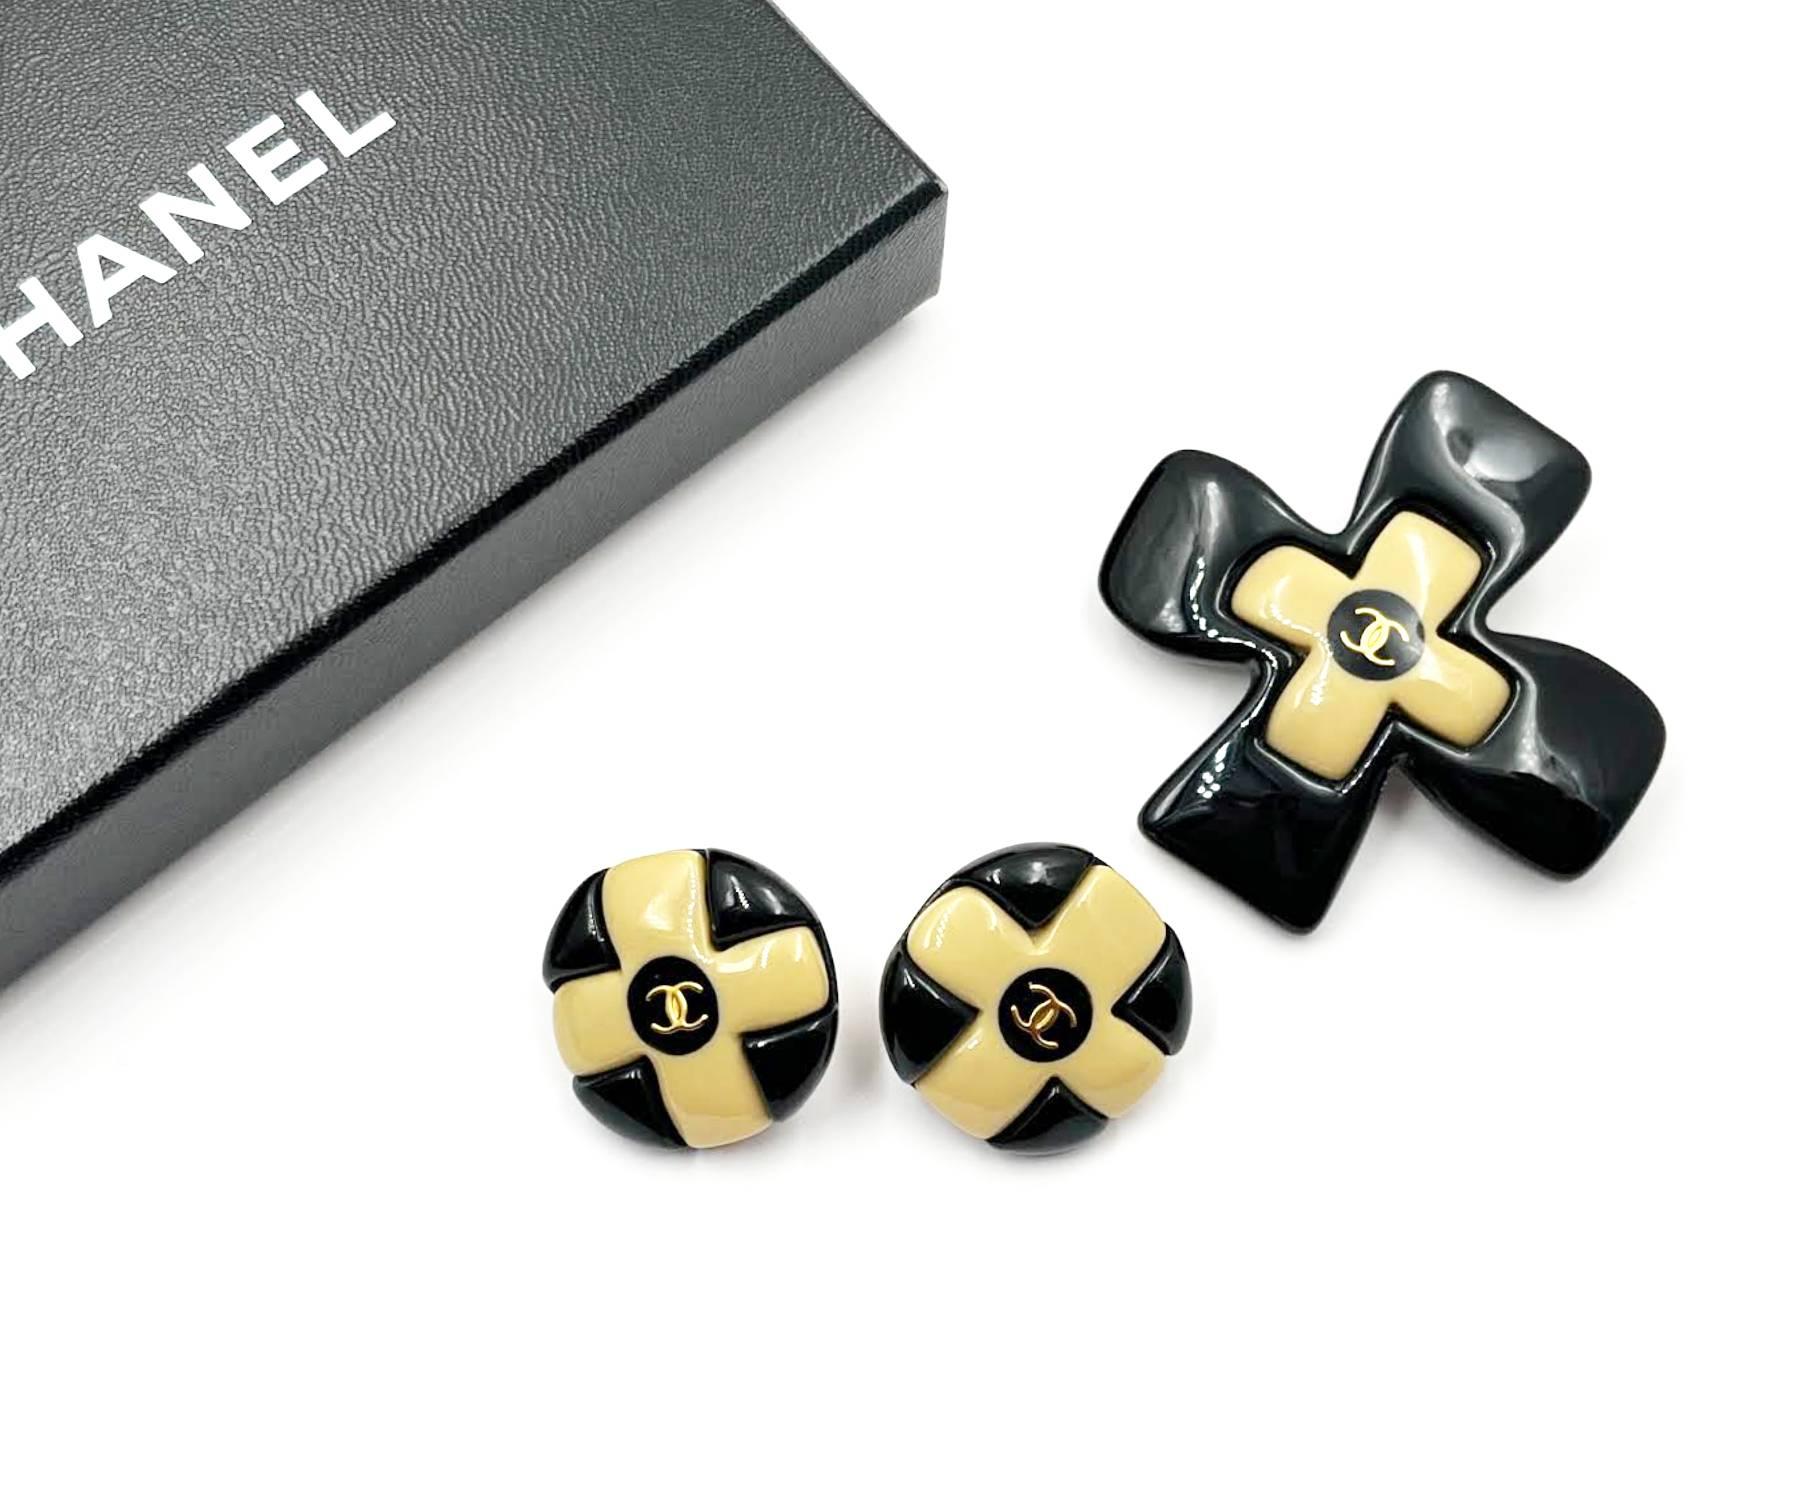 Chanel Vintage Gold Plated Beige Black CC Cross Clip on Earrings Brooch Set

*Marked 95
*Made in France
*Comes with original box

-The brooch is approximately 2.4″ x 2.4″.
-The earrings are approximately 1.25″ x 1.25″.
-Very unique and rare
-In an